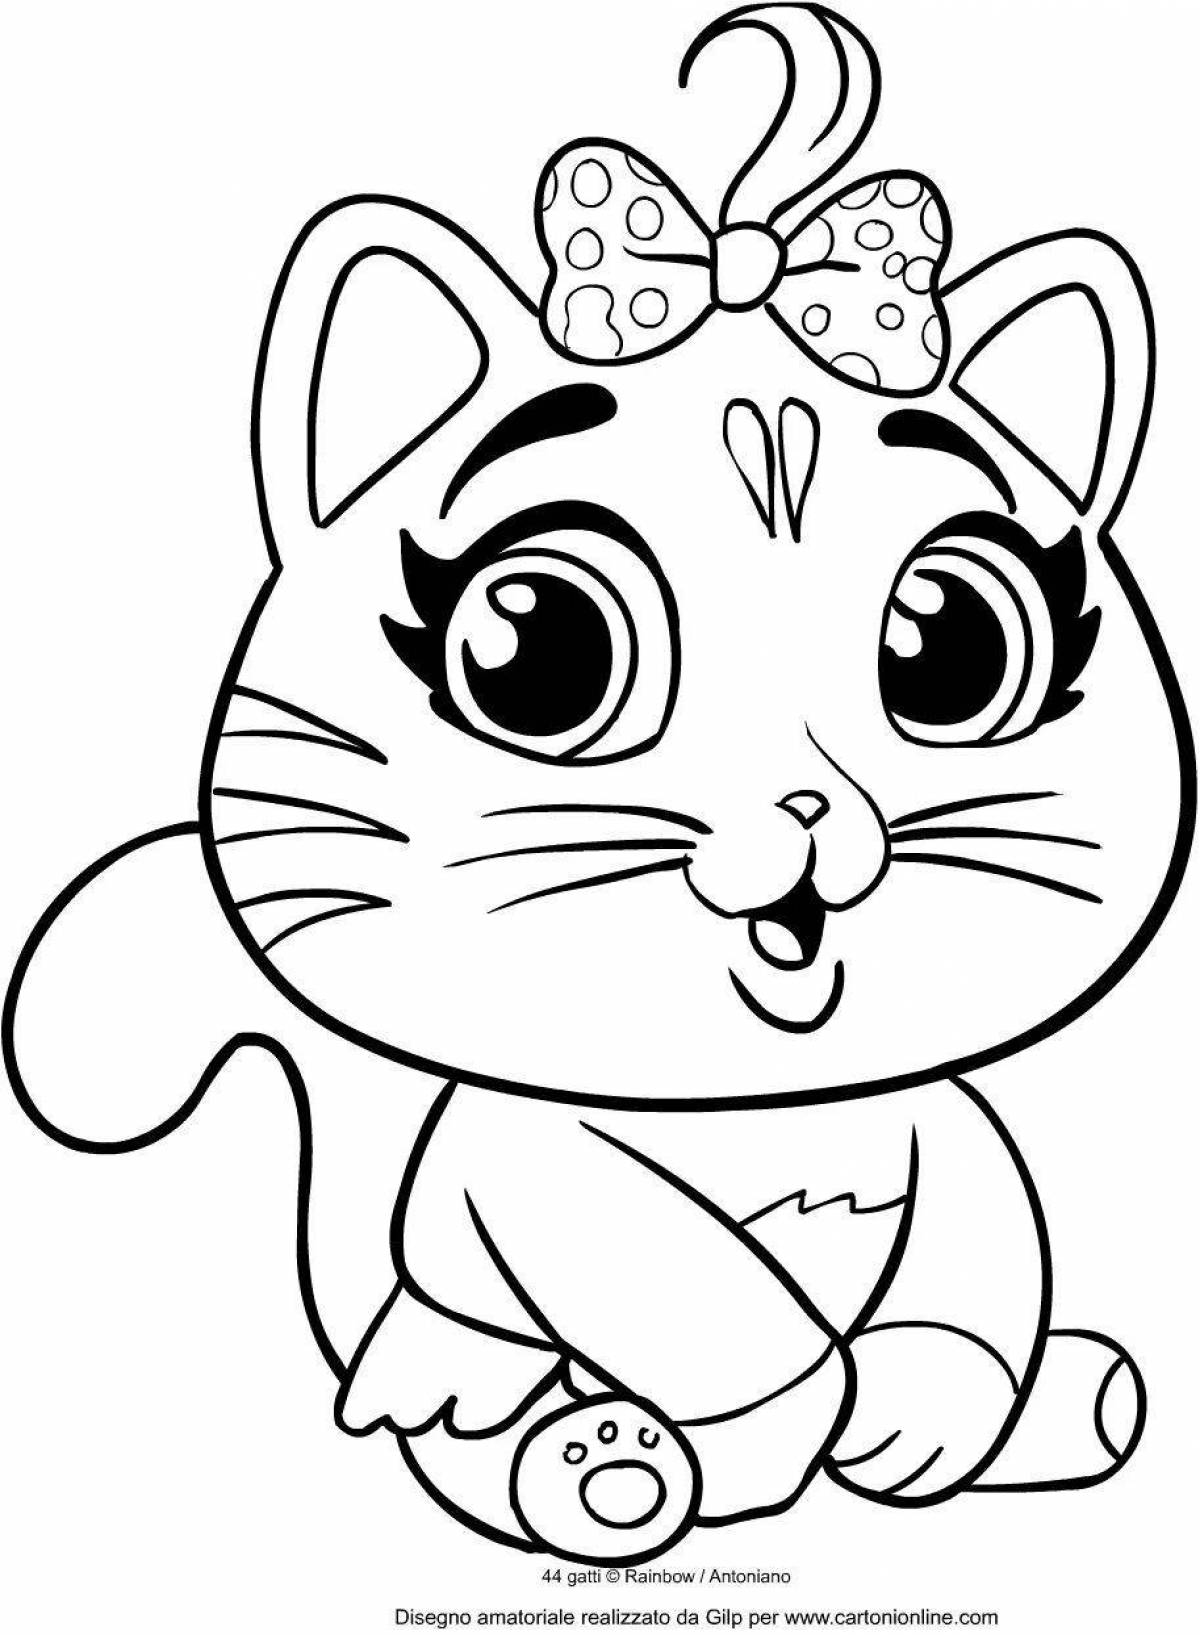 Majestic cat lily coloring page